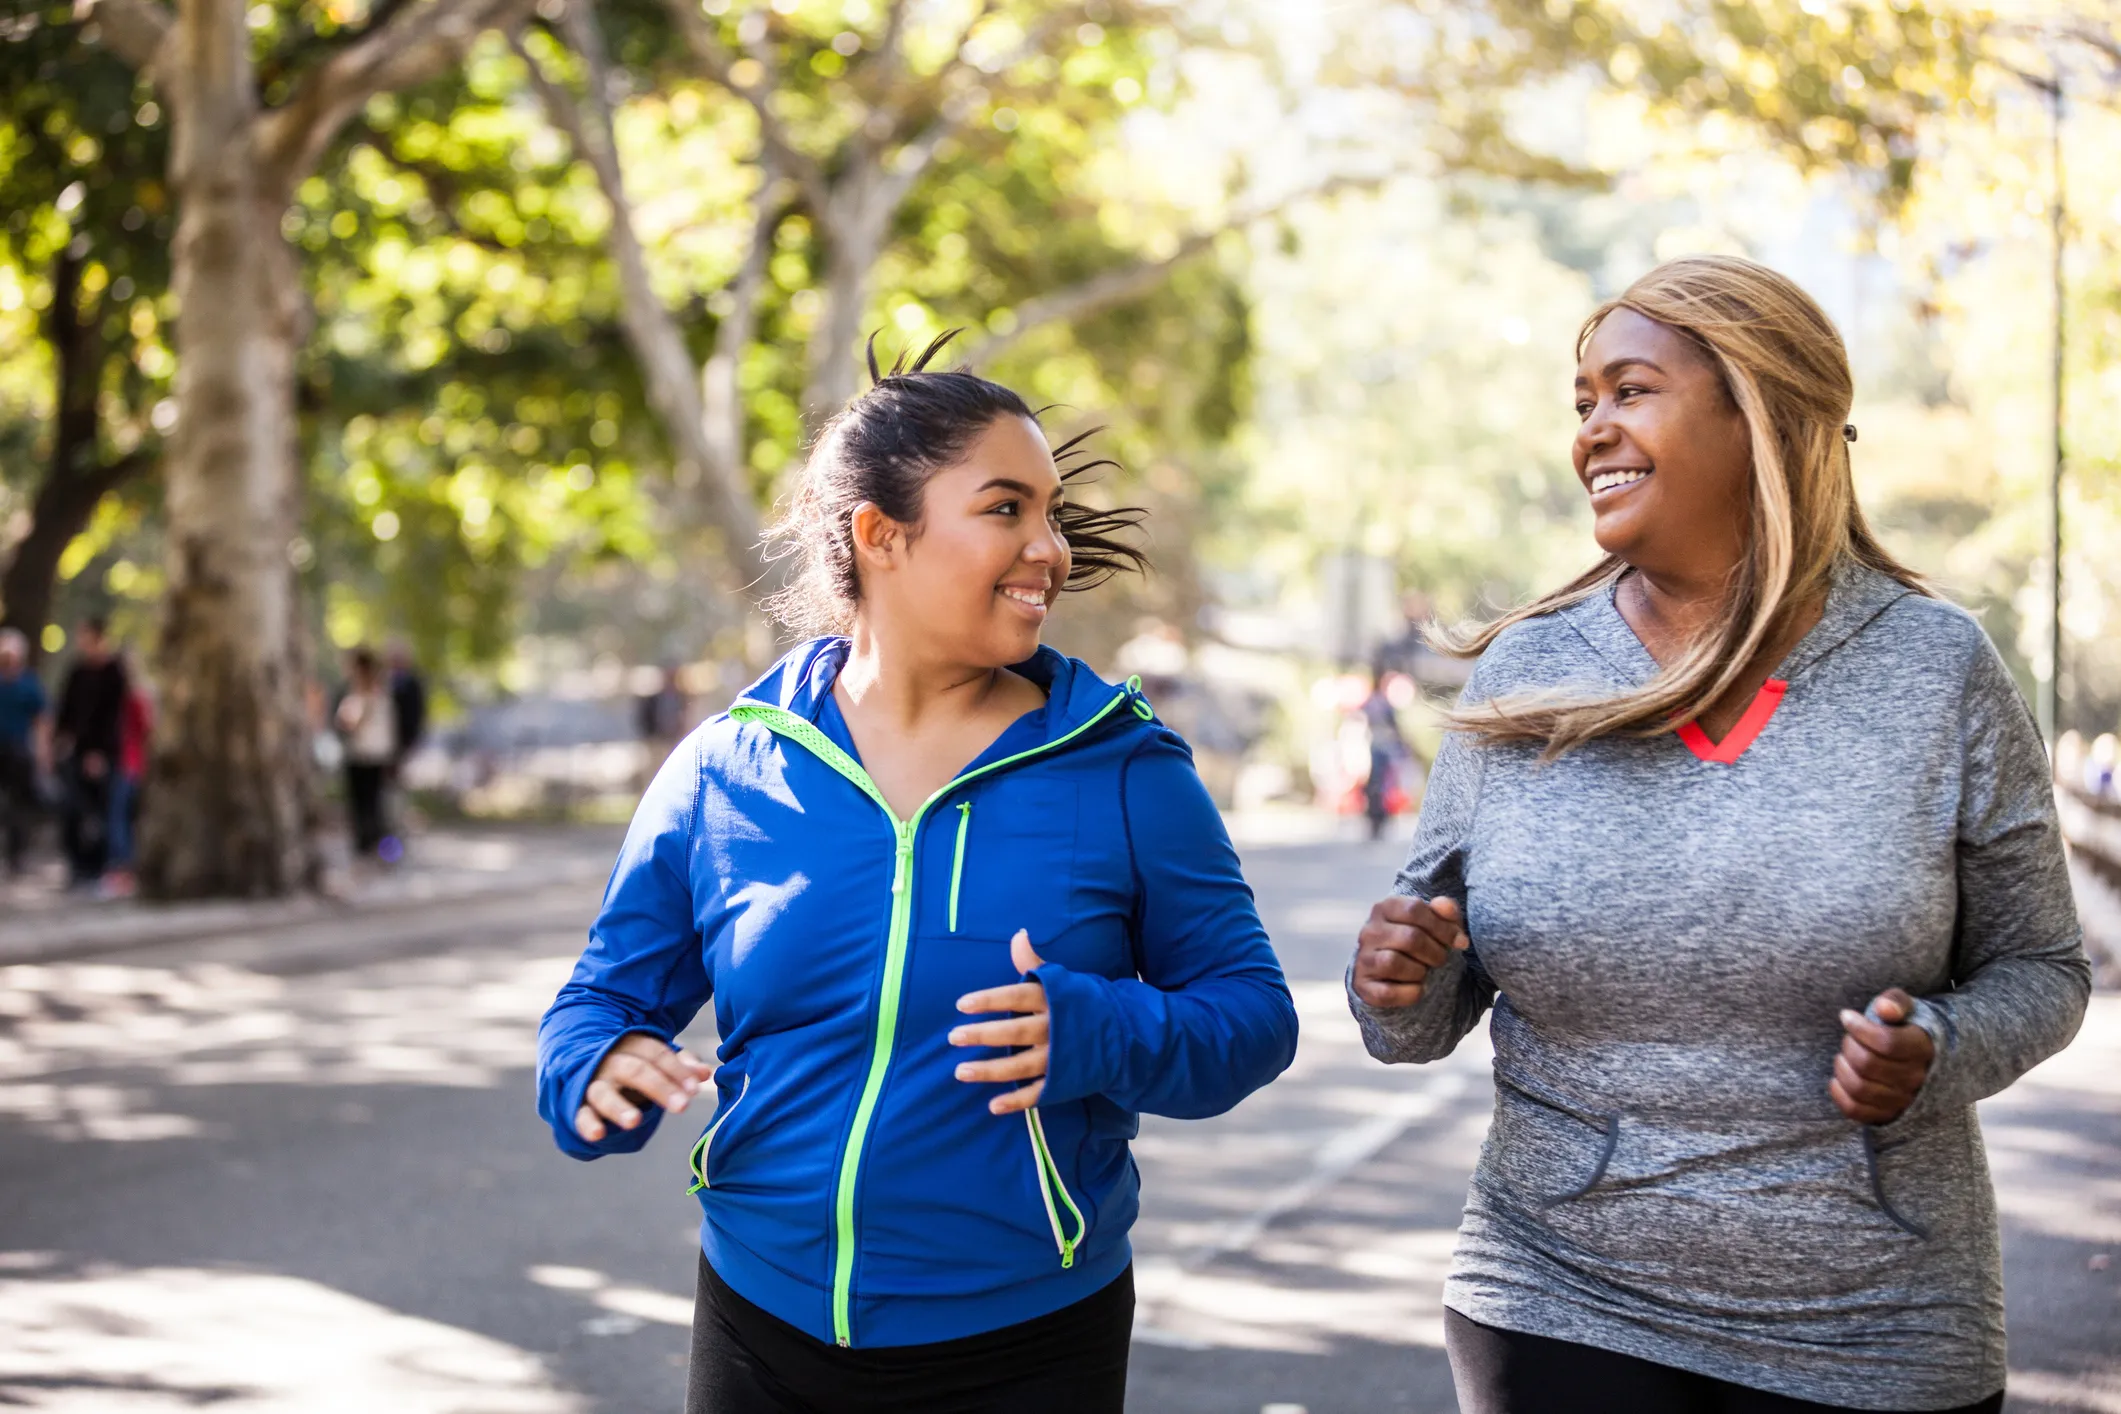 Is Running the Best Exercise for Diabetes?